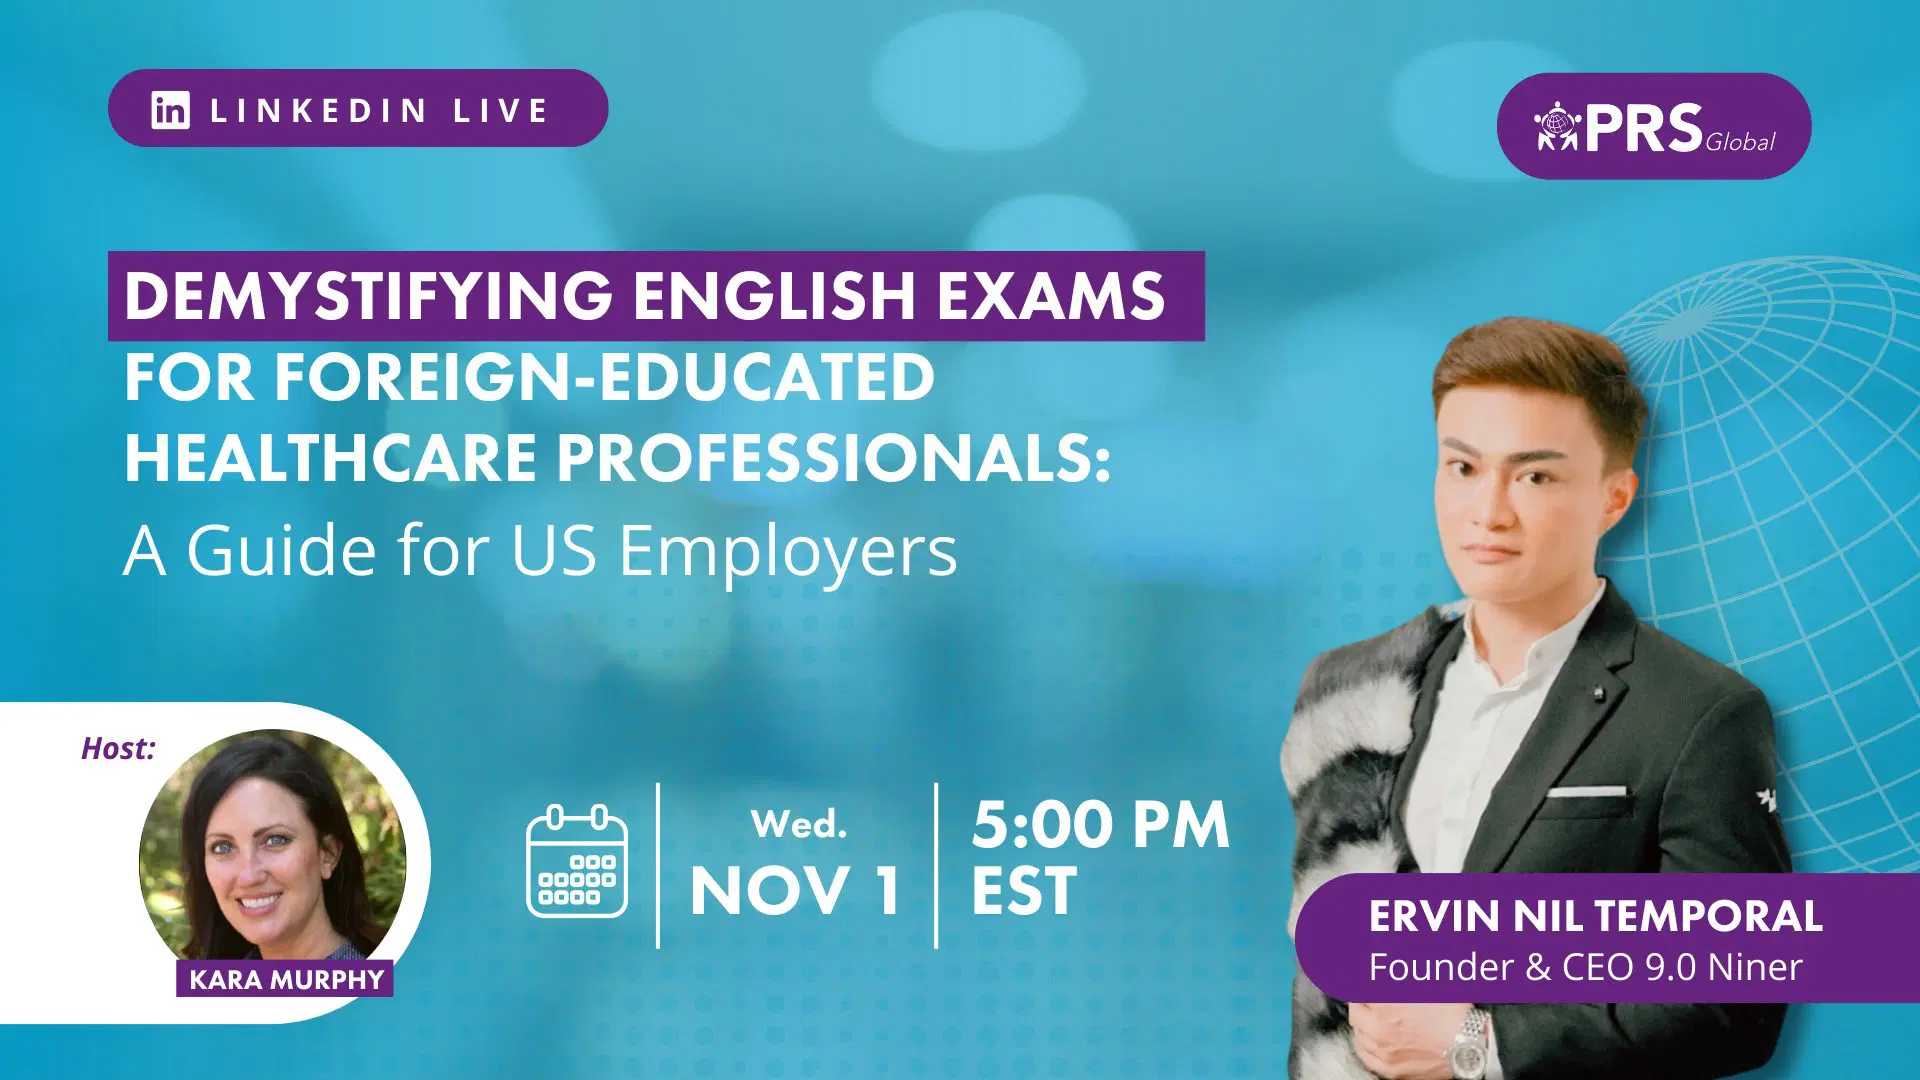 Demystifying English Exams for Foreign-Educated Healthcare Professionals